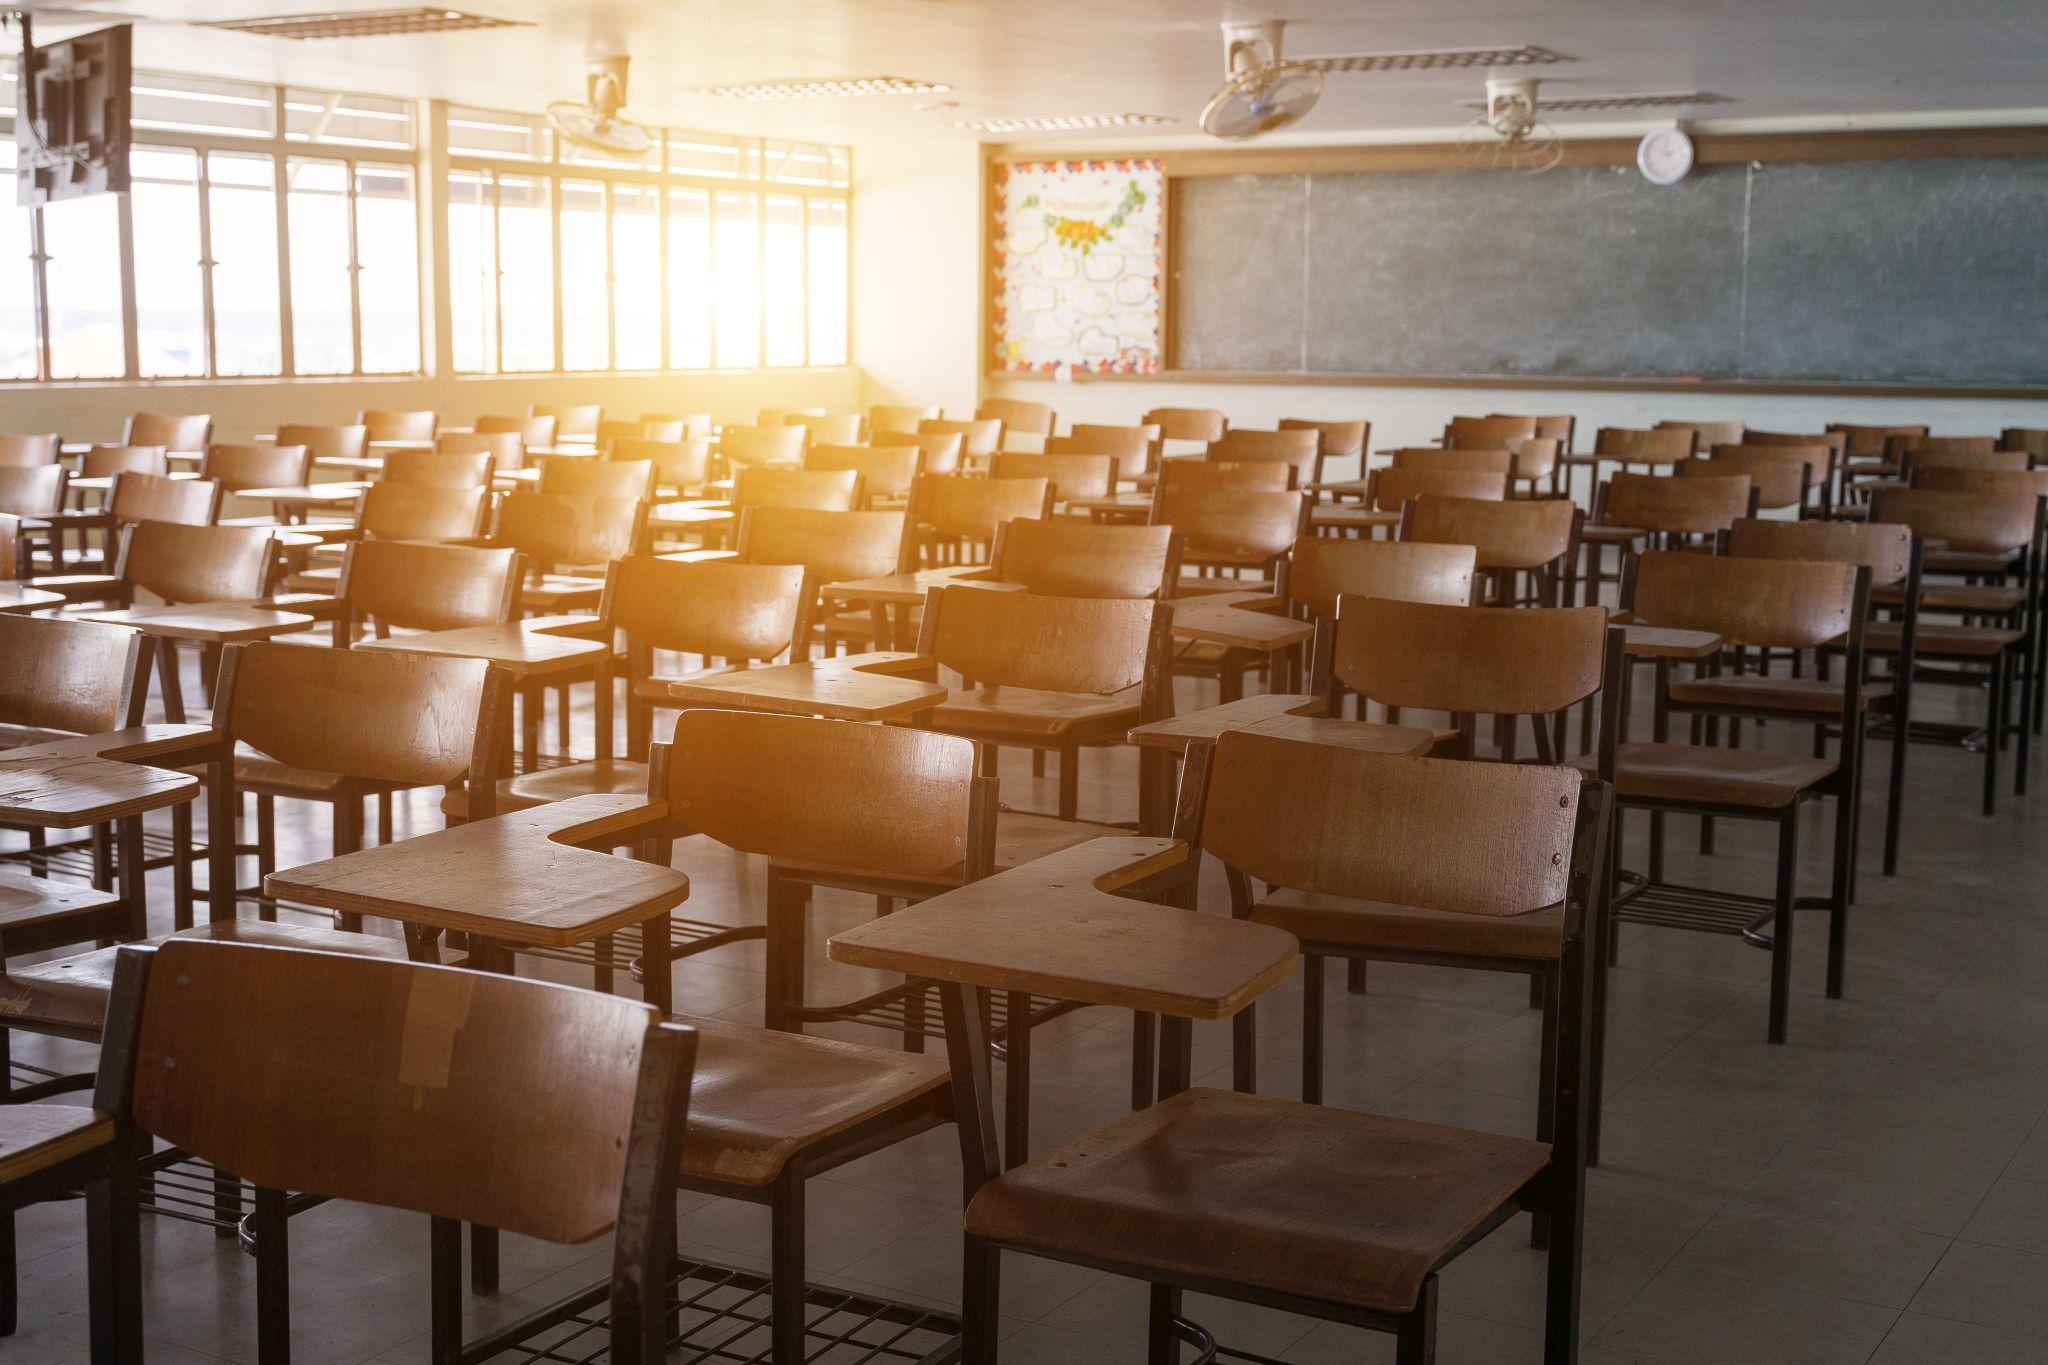 Empty school classroom with many wooden chairs. Wooden chairs in classroom.